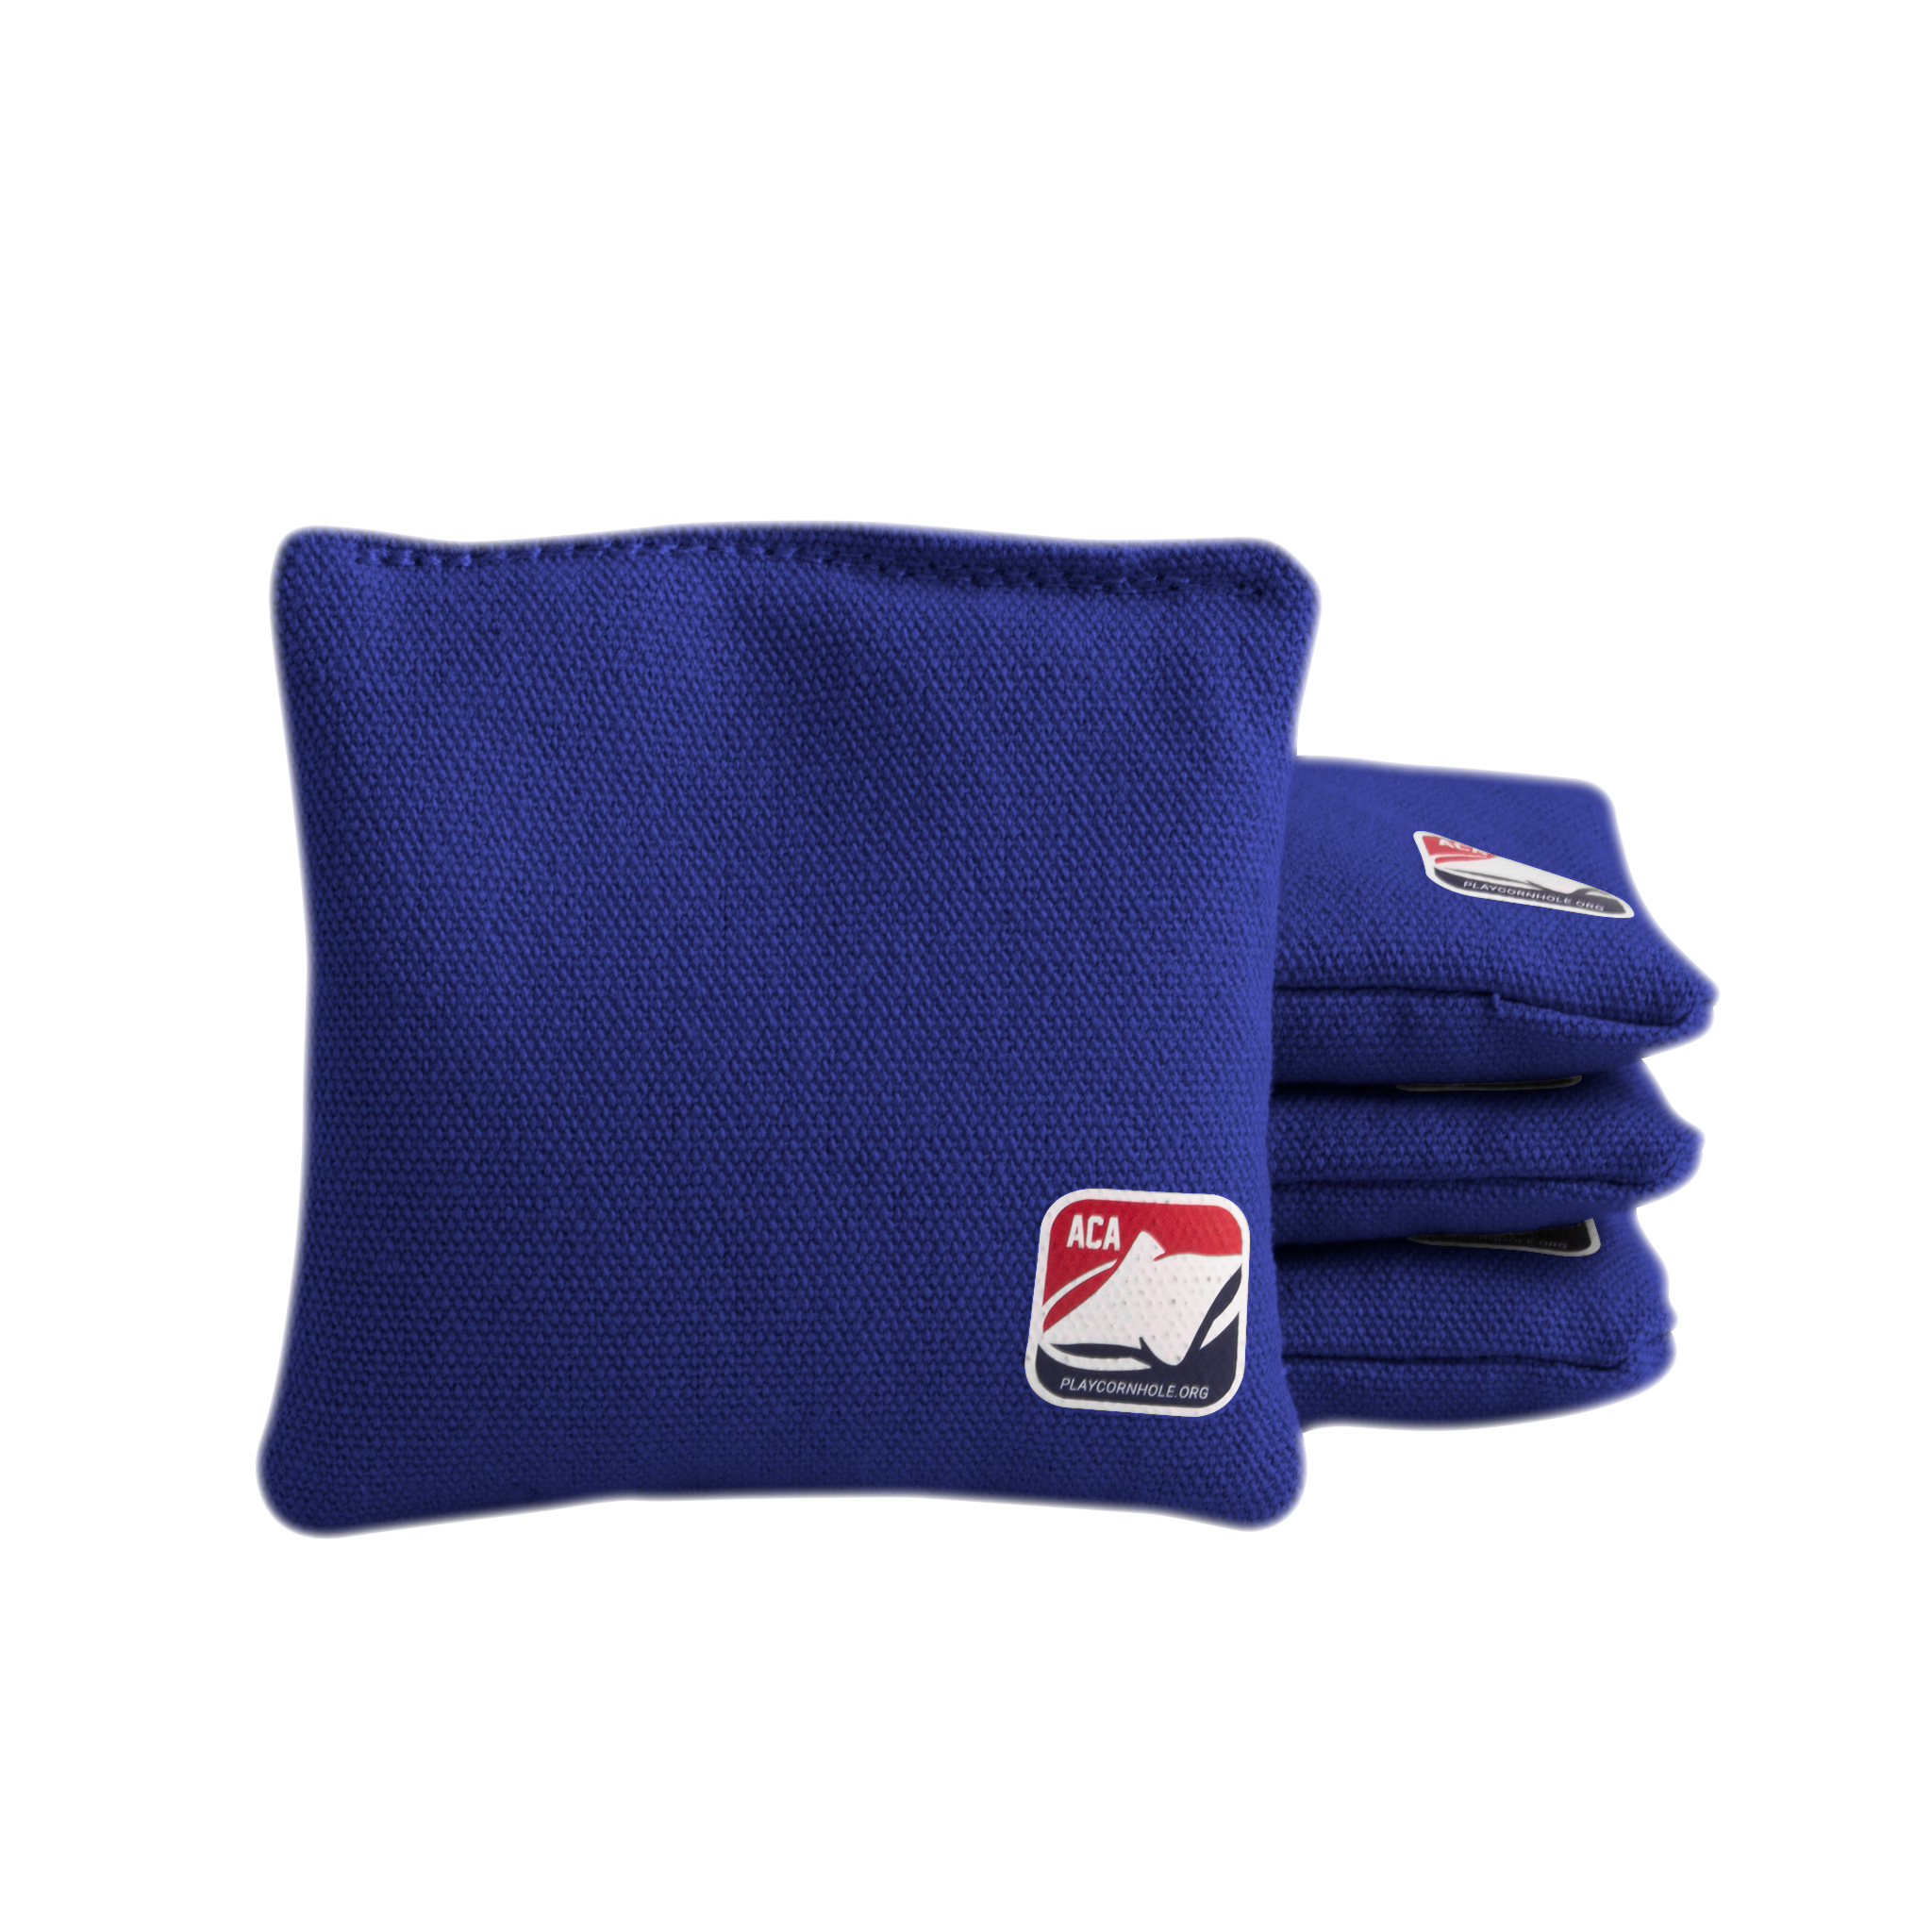 4-in Daily 44x Royal Blue Recreational Cornhole Bags